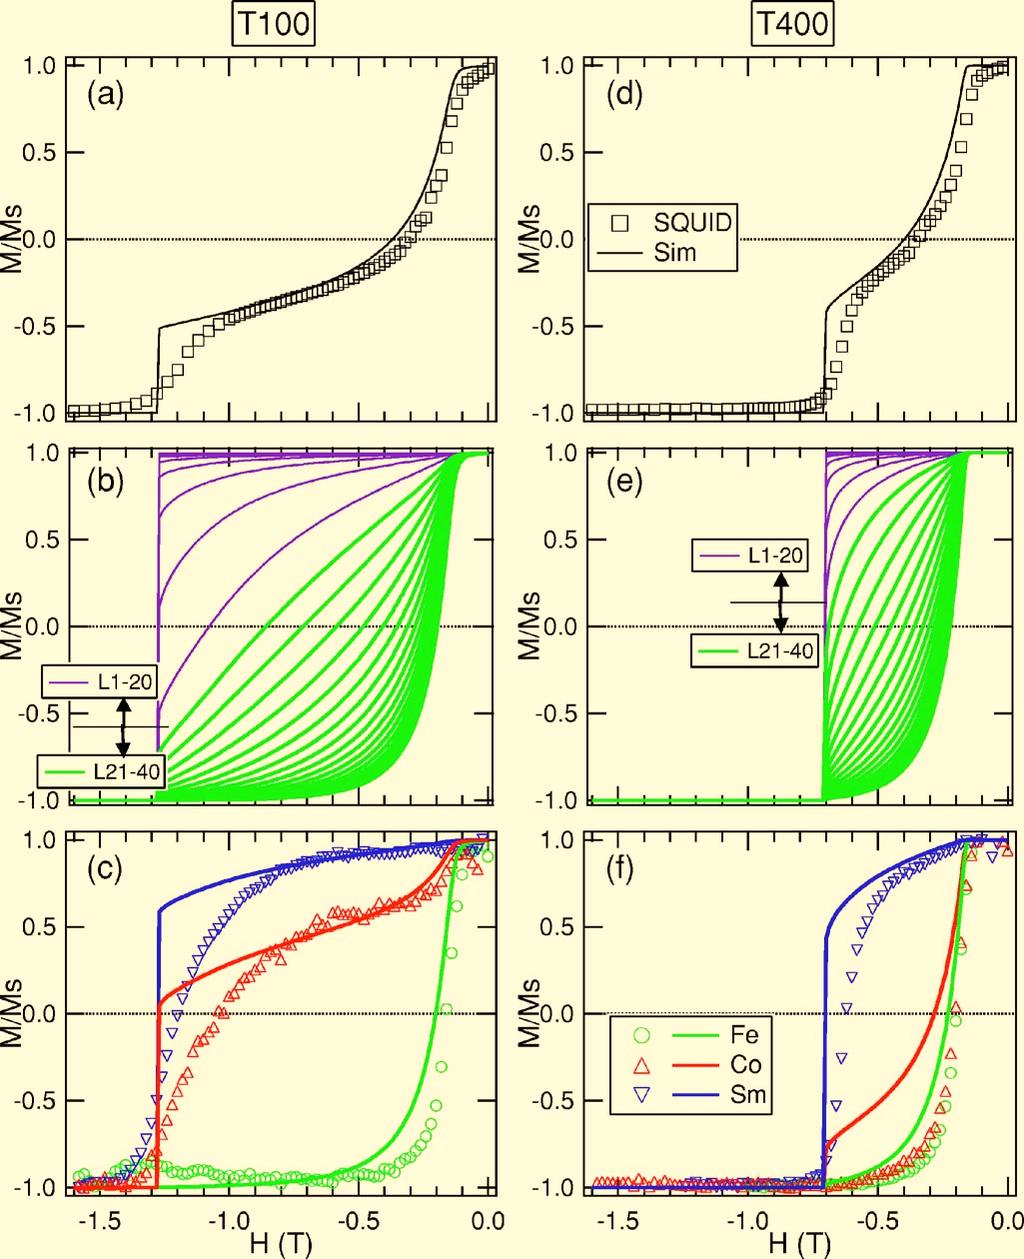 ROLE OF DIFFUSED Co ATOMS IN IMPROVING FIG. 6. Color online a c Calculated electric field intensity profiles for the T400 sample at the Fe L 3,CoL 3, and Sm M 4 resonant energies.